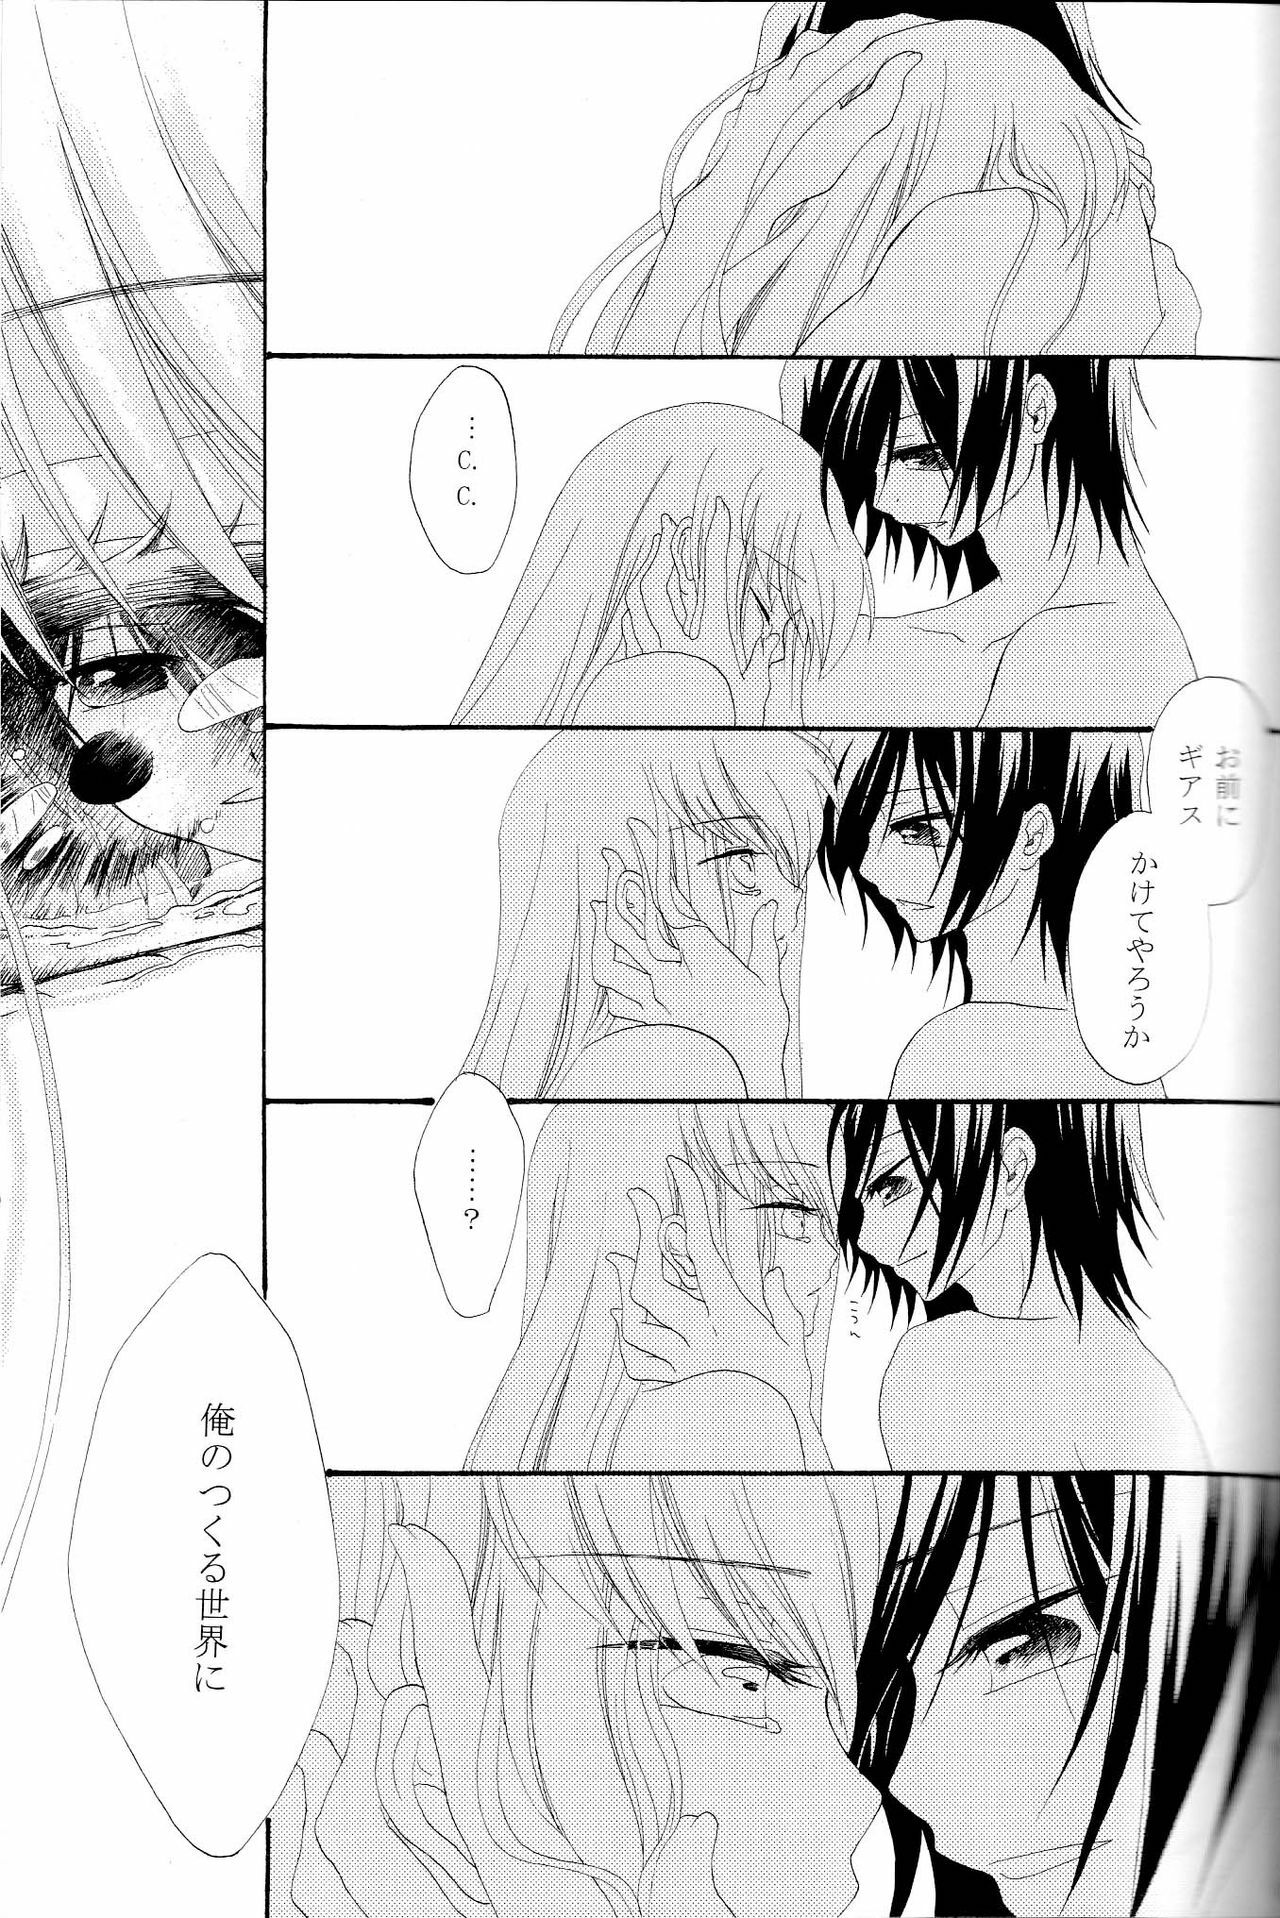 [APRICOT TEA] The last love letter presented to my dear only partner. (Code Geass) page 34 full